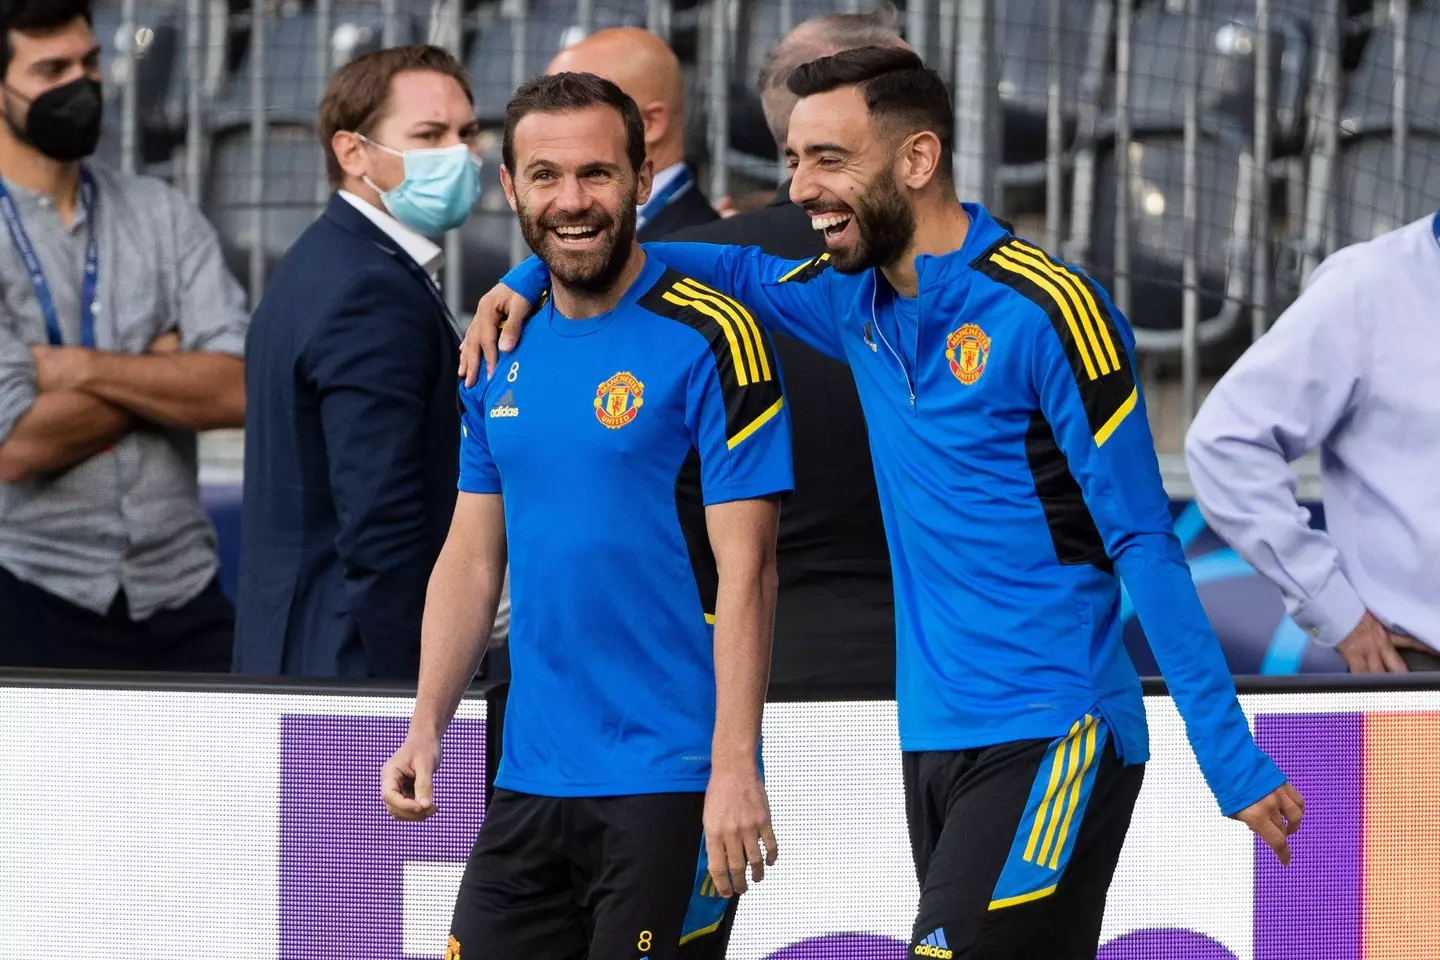 Fernandes with Juan Mata during their time at United together. Image: Alamy